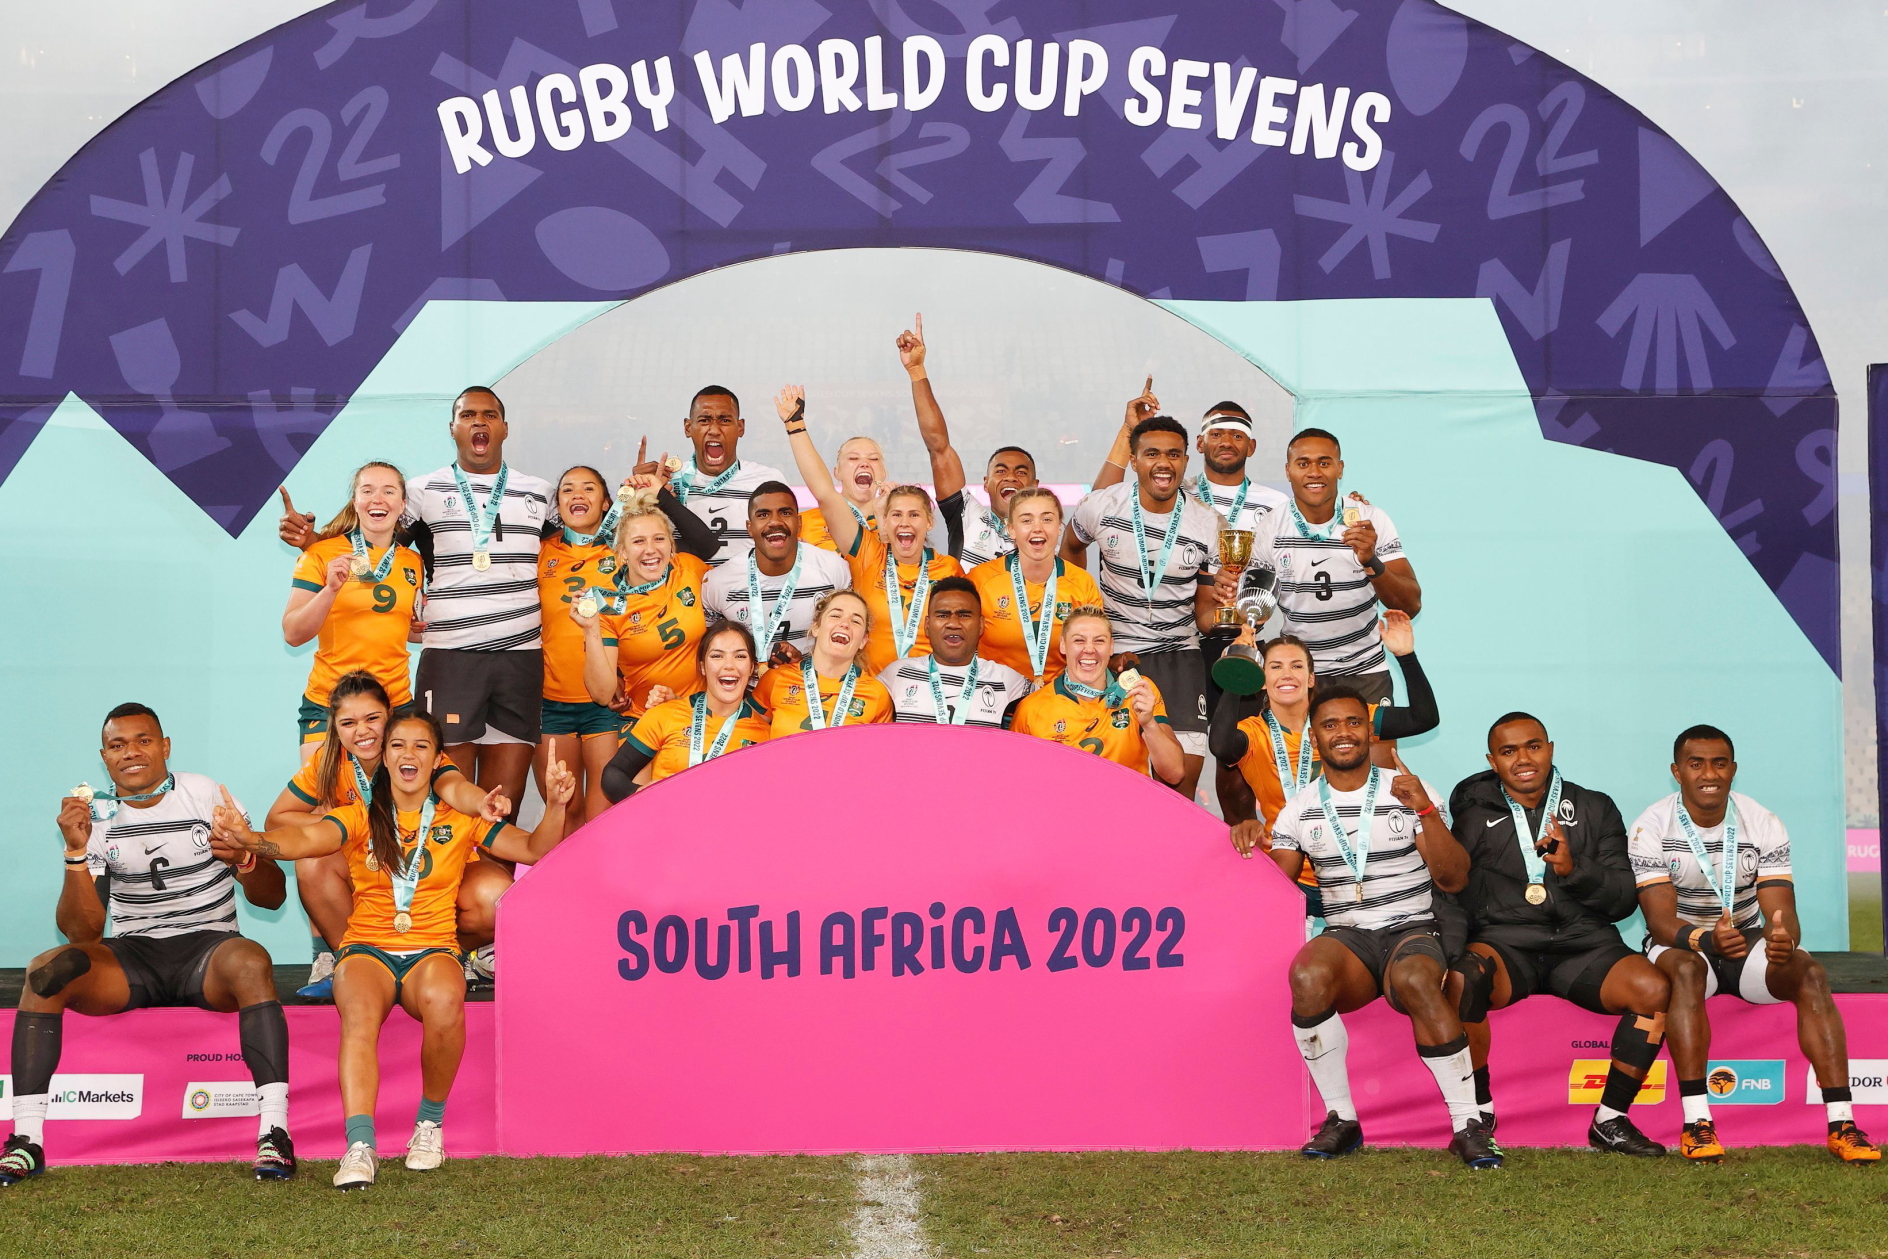 Fiji men and Australia women win Rugby World Cup Sevens 2022 titles. Click to enlarge.